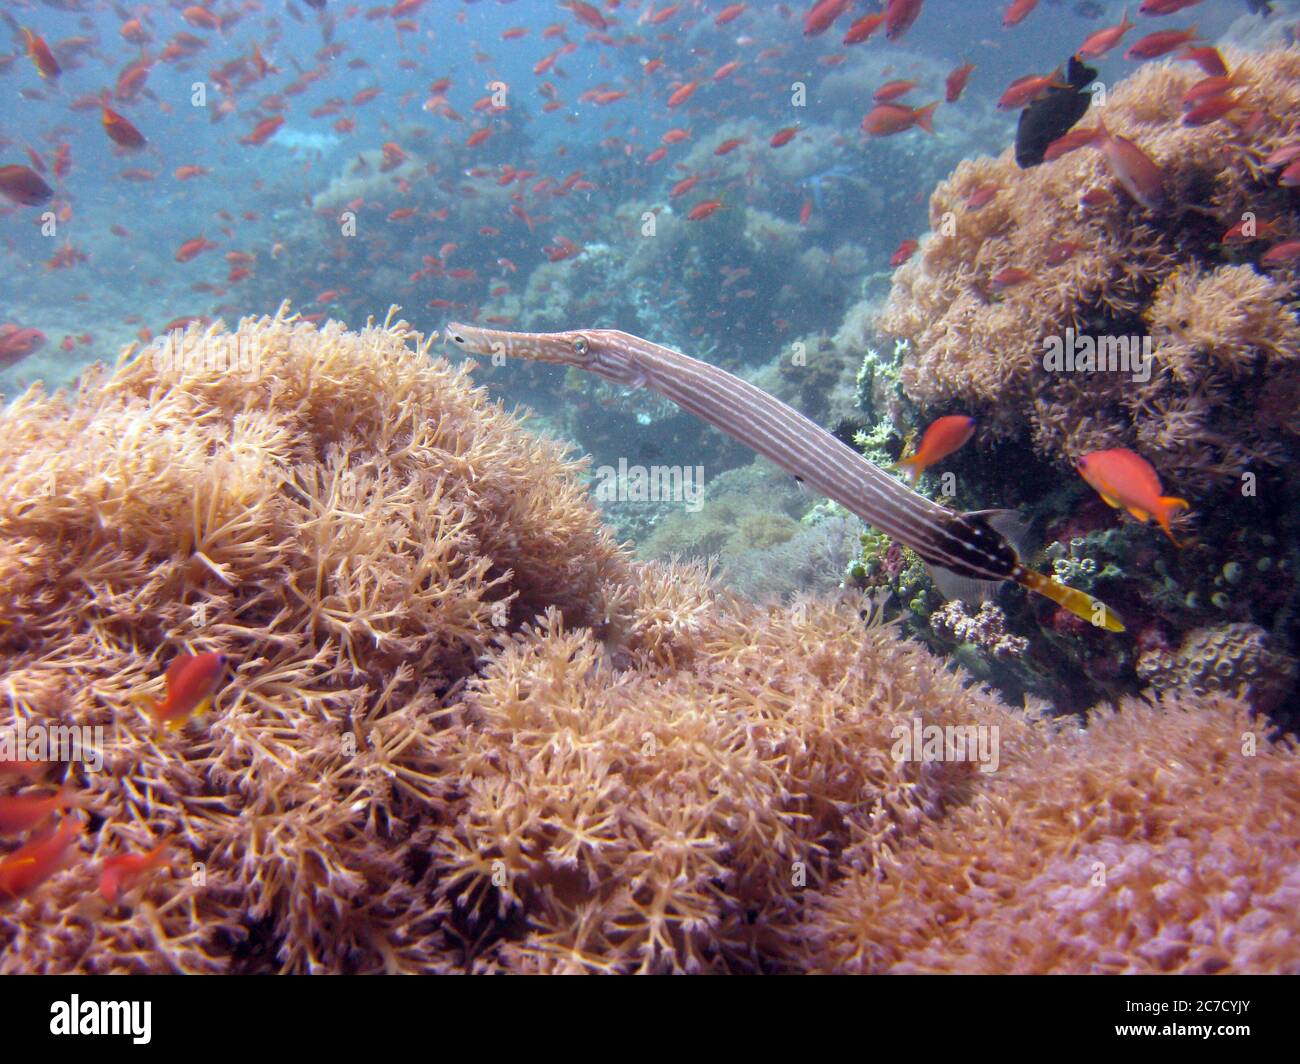 Closeup underwater shot of a long striped squid swimming amongst corals and red fish Stock Photo